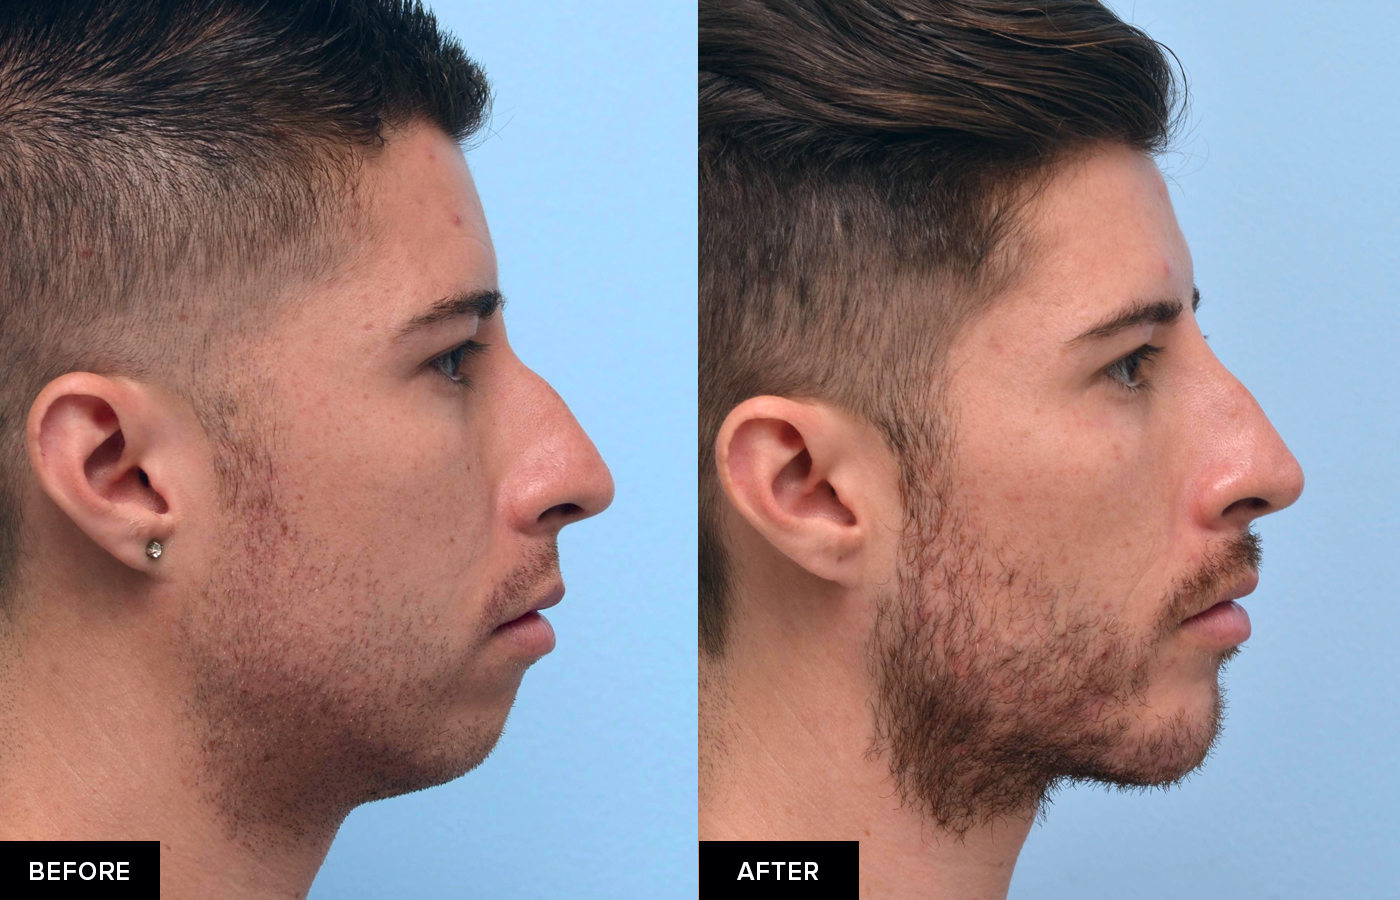 For men’s jawline filler treatments, the goal is to sculpt a chiseled jawli...